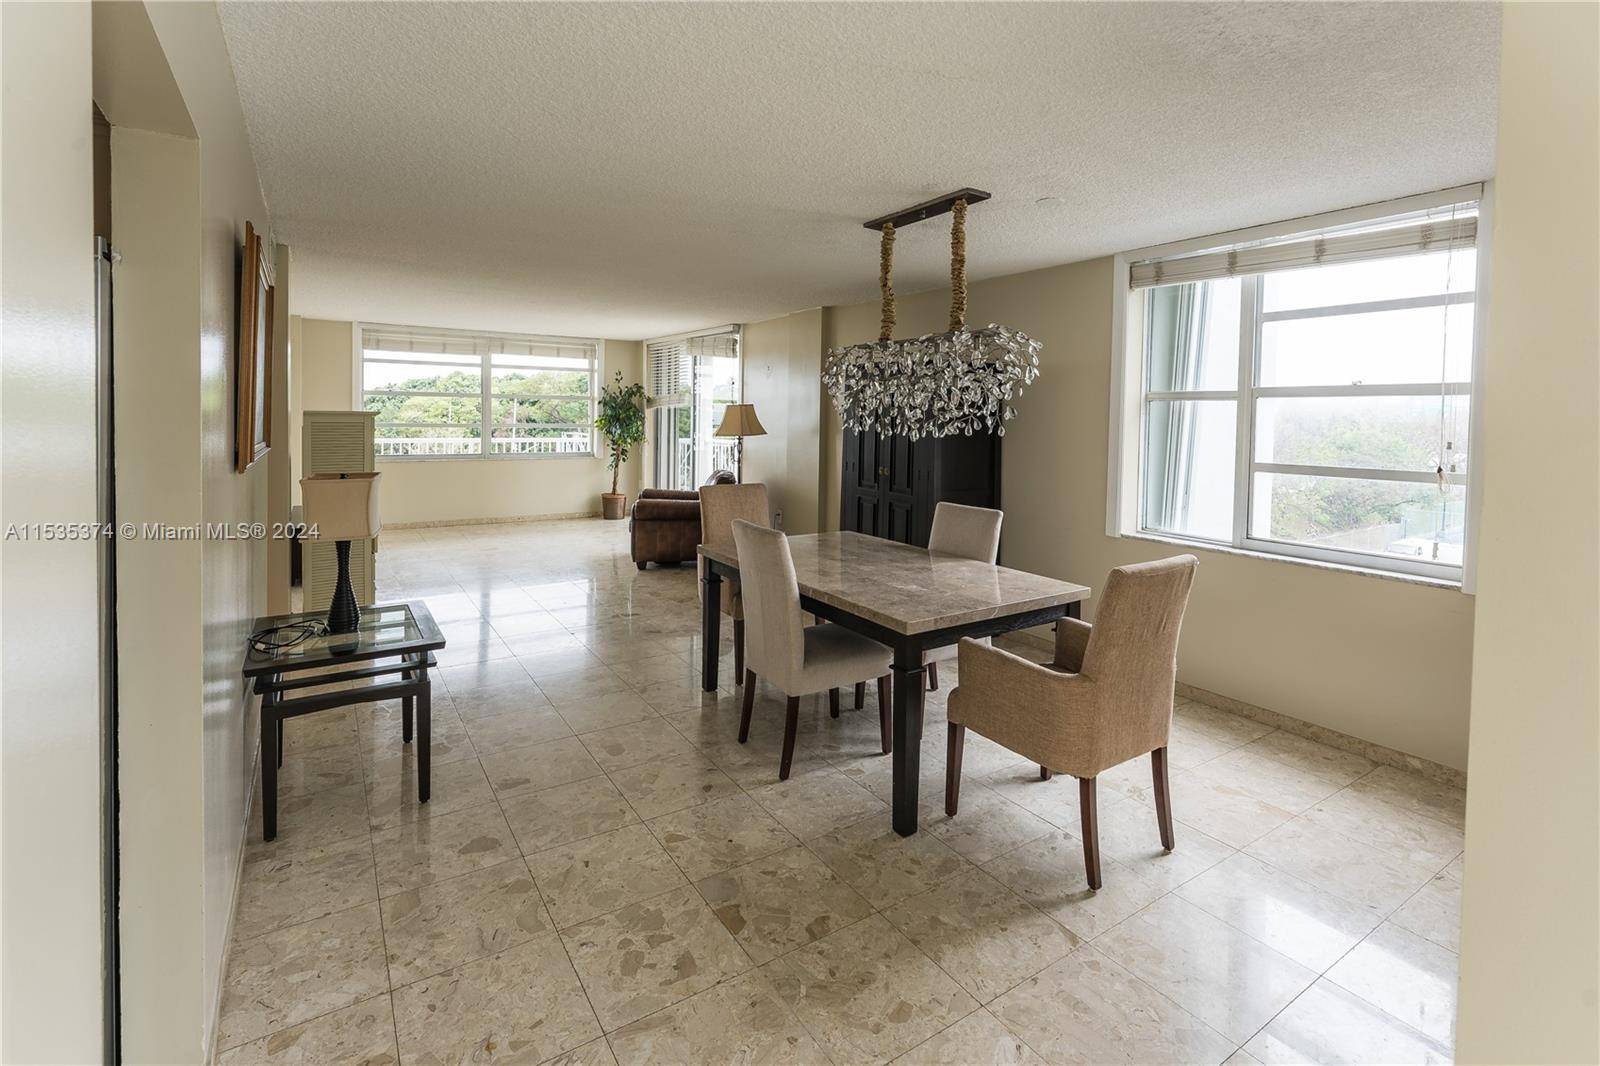 Large 2 2 apartment in Brickell.